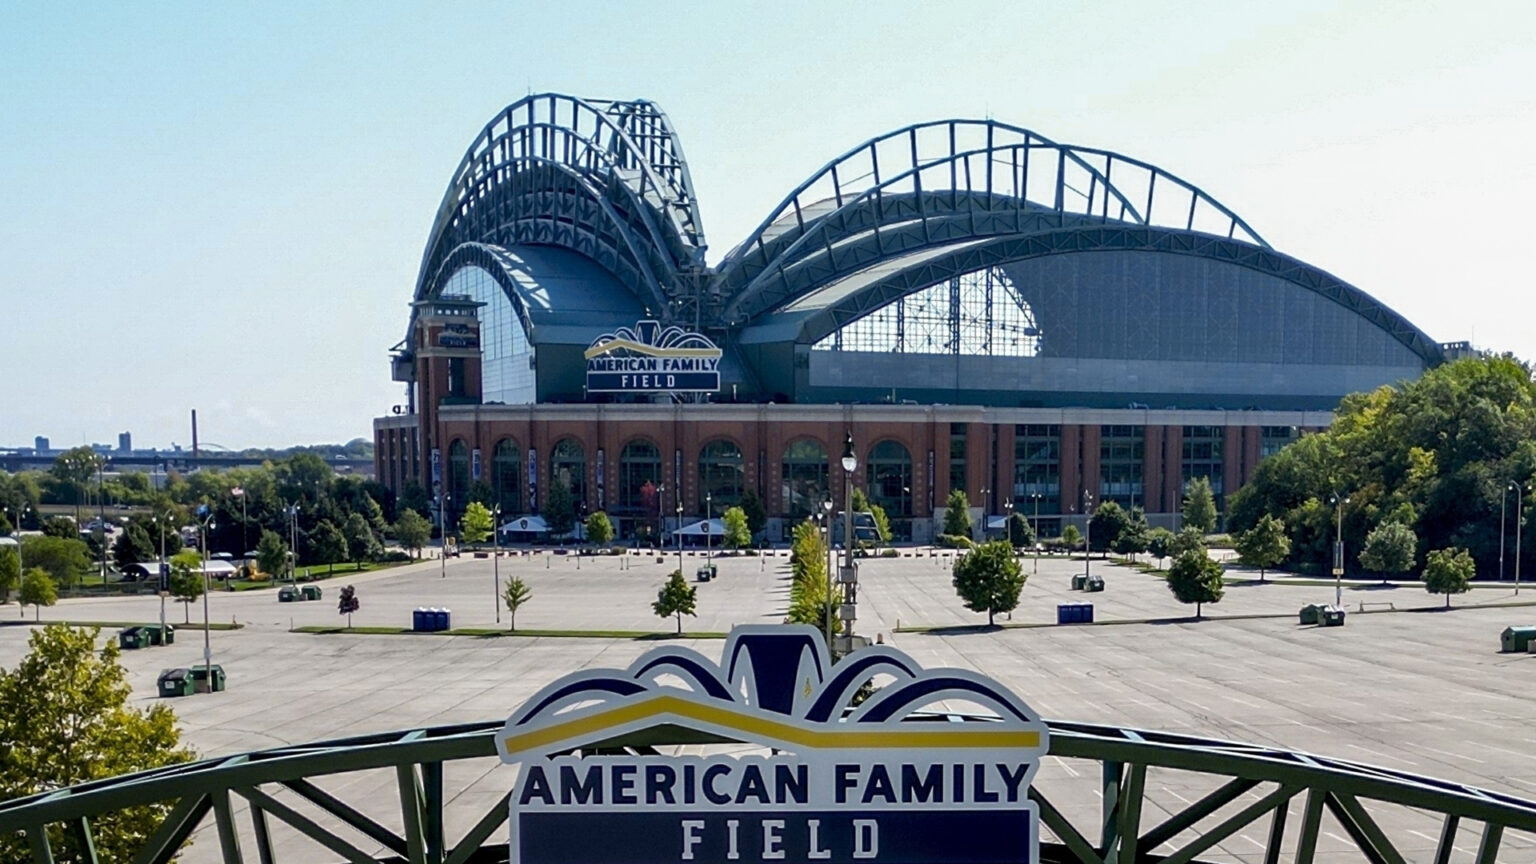 A photo shows a baseball stadium with an open retractable roof and a sign over its home plate entrance reading American Family Field, surrounded by empty parking lots and trees, with the top of a gate with another sign reading American Family Field in he foreground.